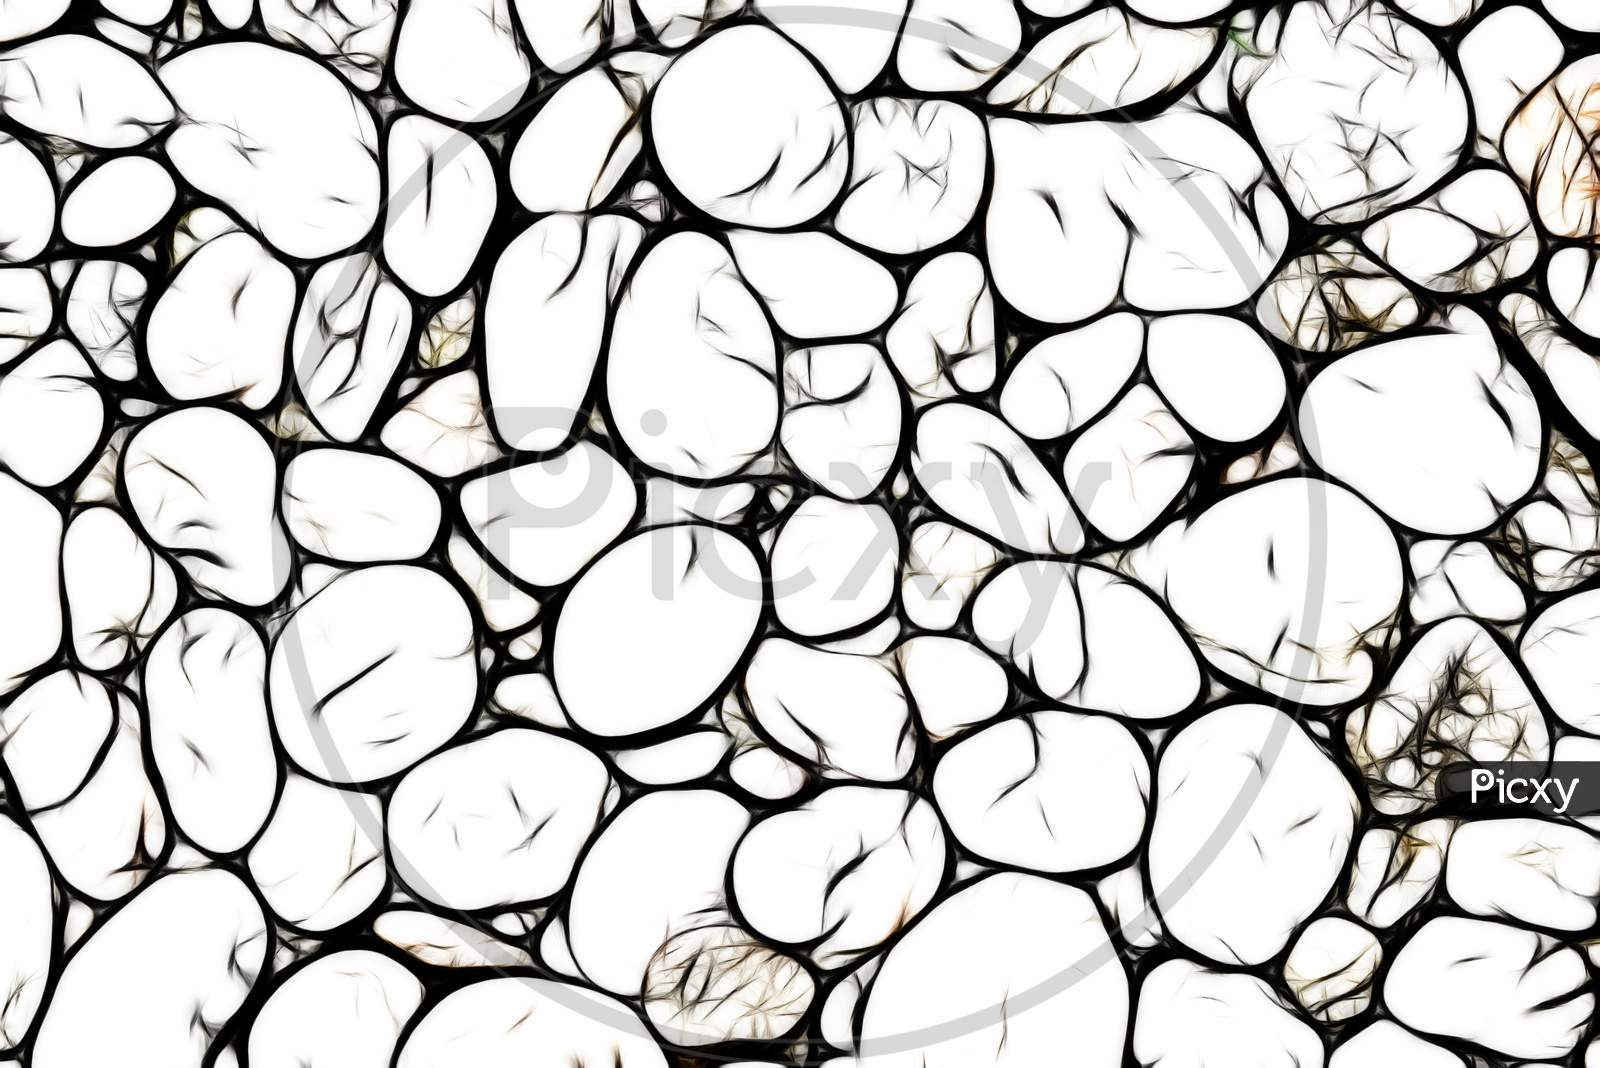 White Pebble Stone Background. Texture And Material Theme.